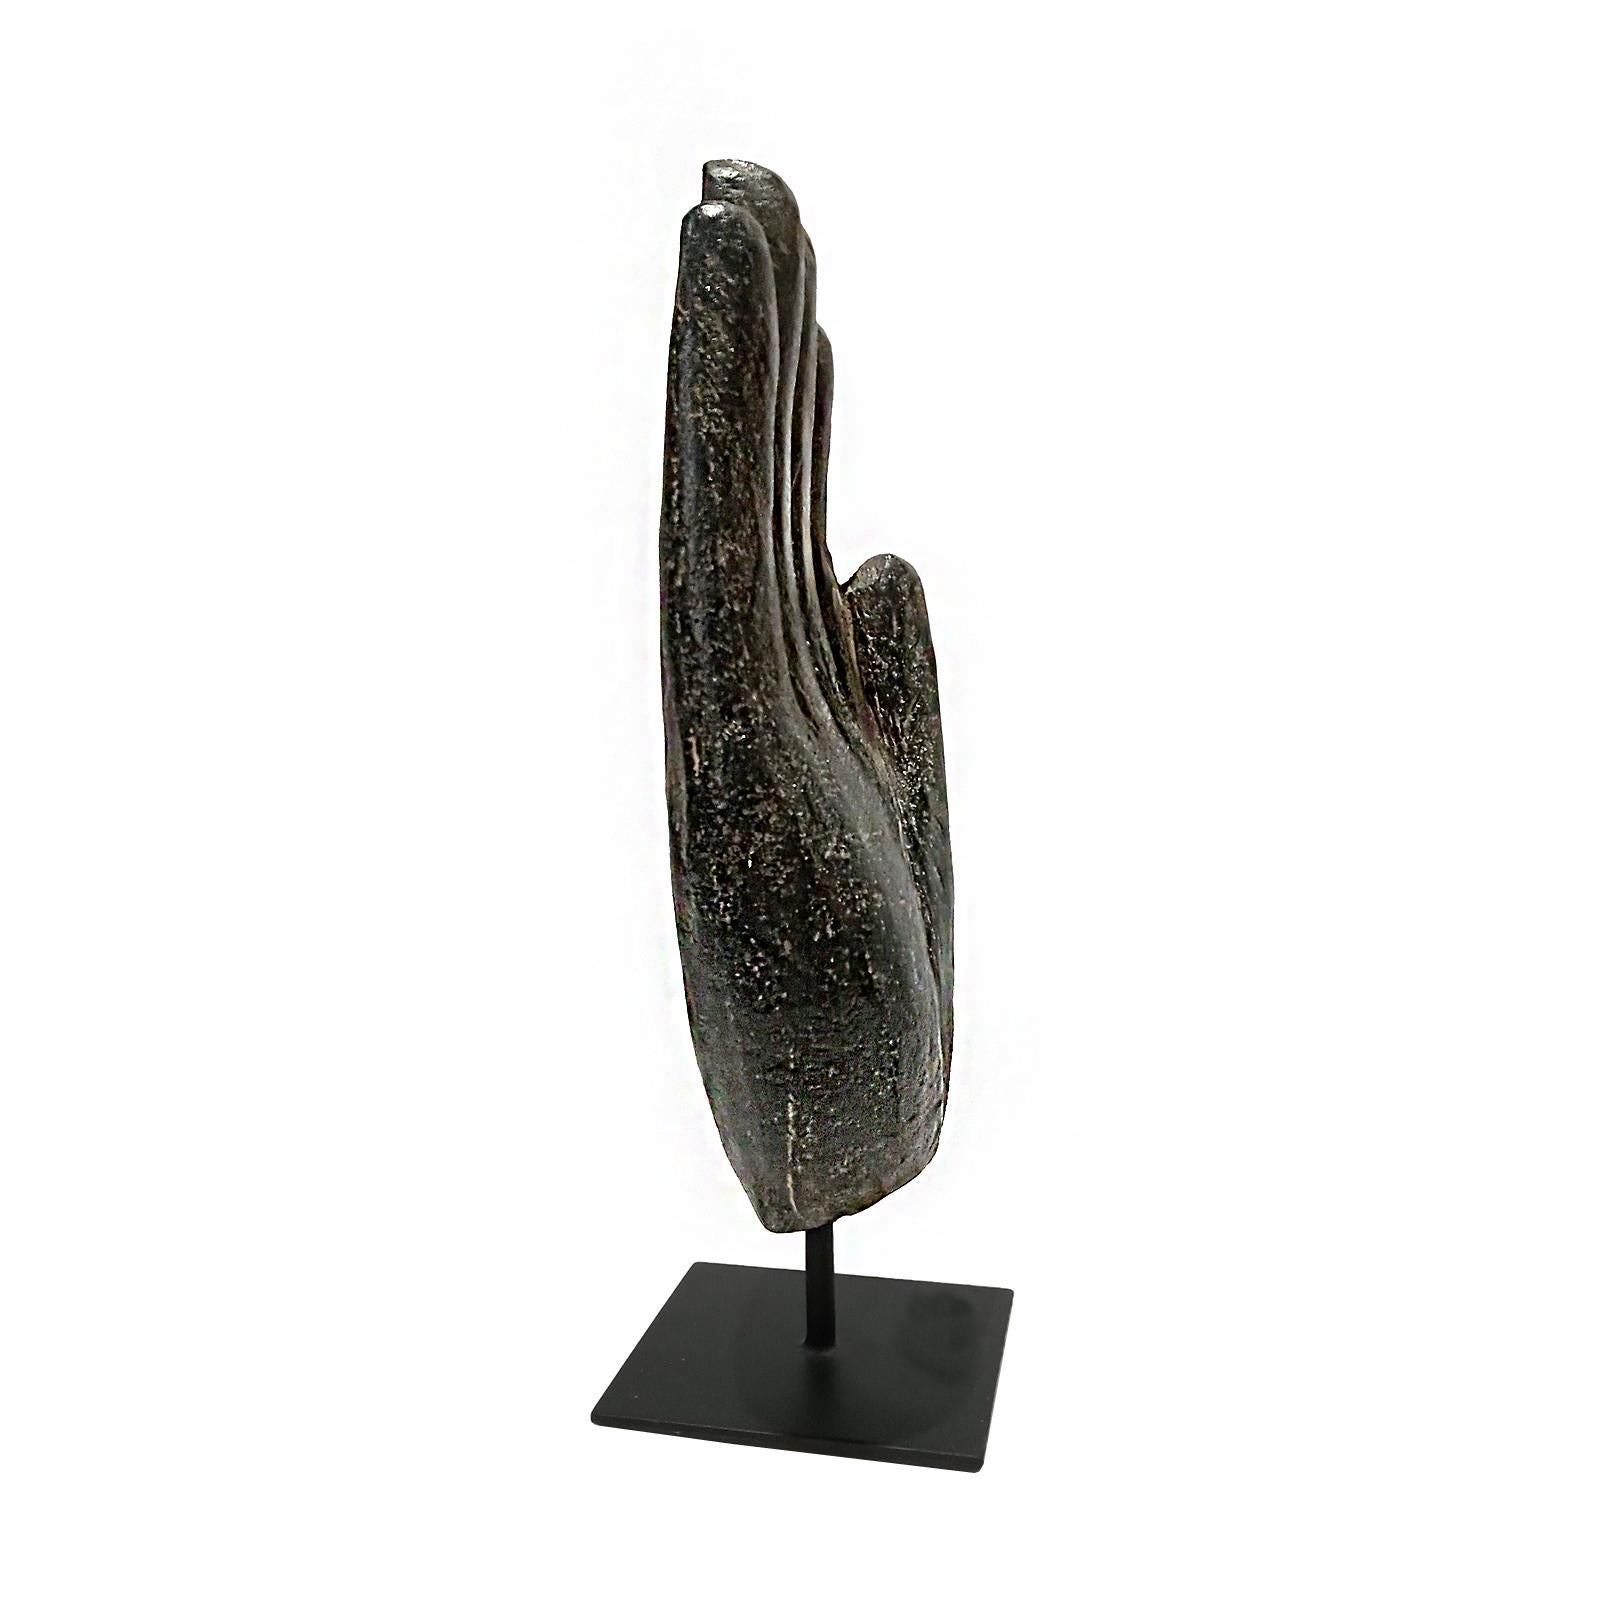 Three Volcanic Rock Hand Sculptures, Mid 20th Century For Sale 3